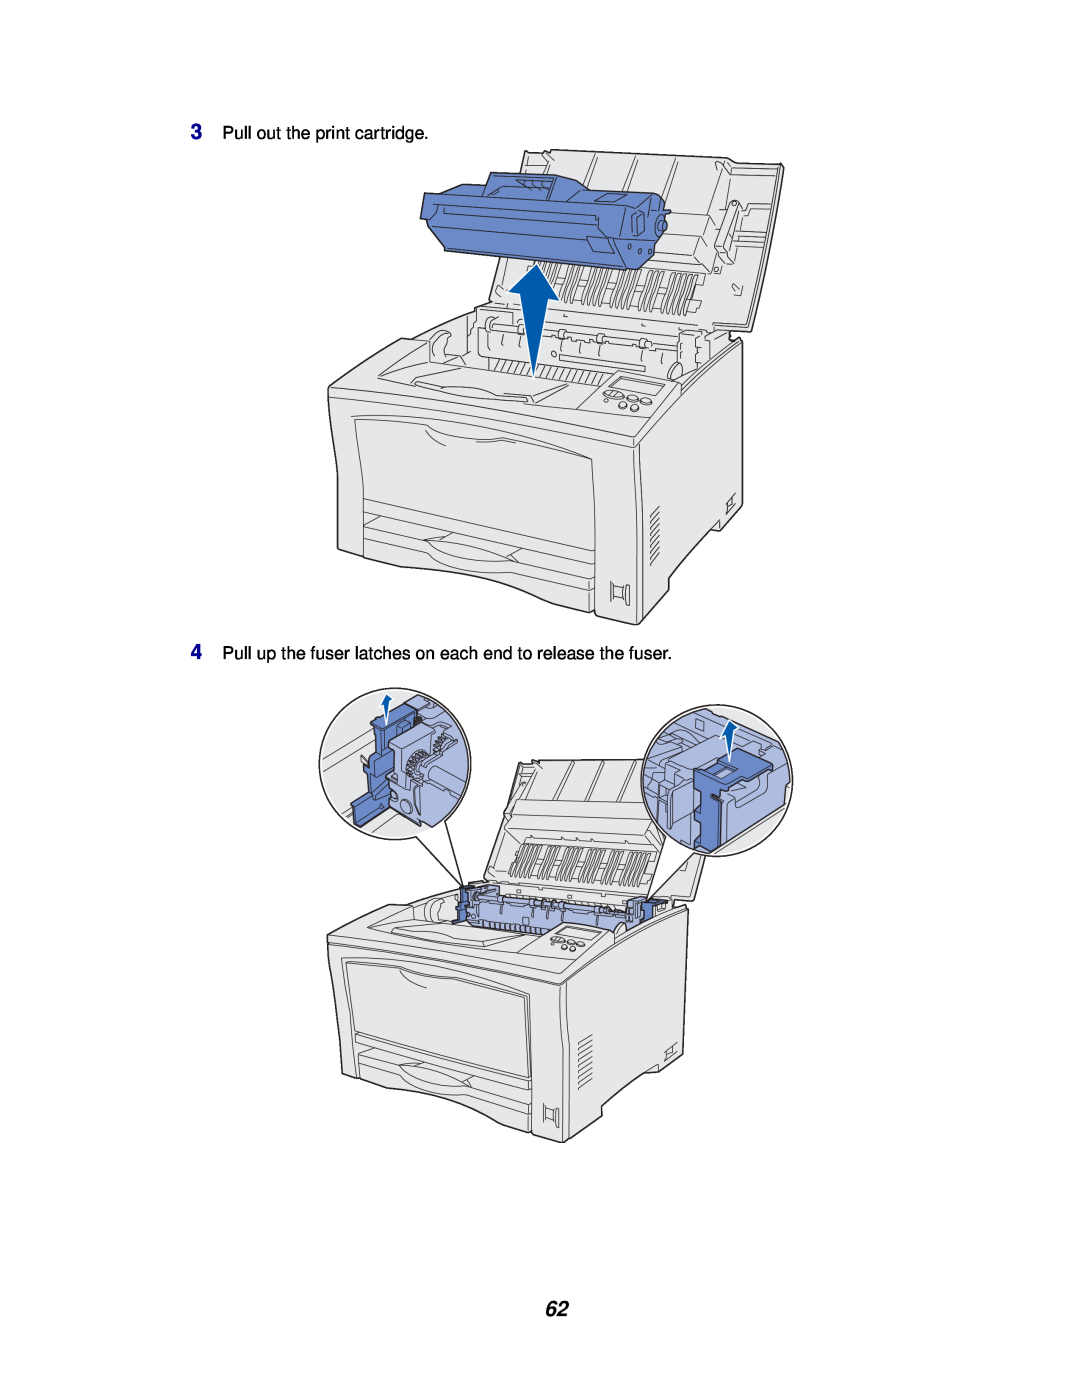 Lexmark 812 manual Pull out the print cartridge, Pull up the fuser latches on each end to release the fuser 